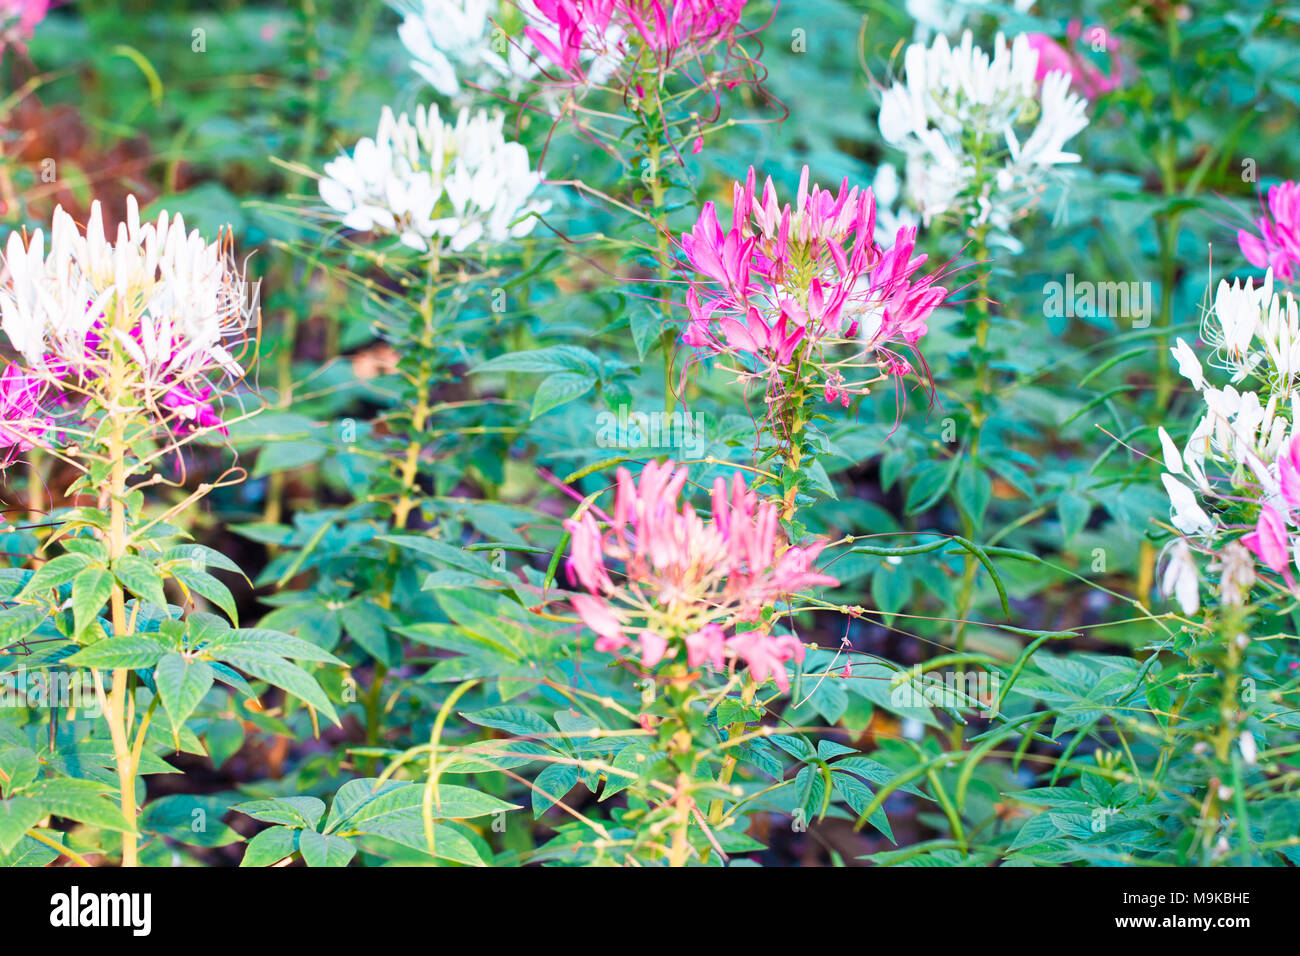 Pink and wihite Spider flower ,Cleome hassleriana isolate in sping sumer after raining in the morning, technical cost-up. Stock Photo